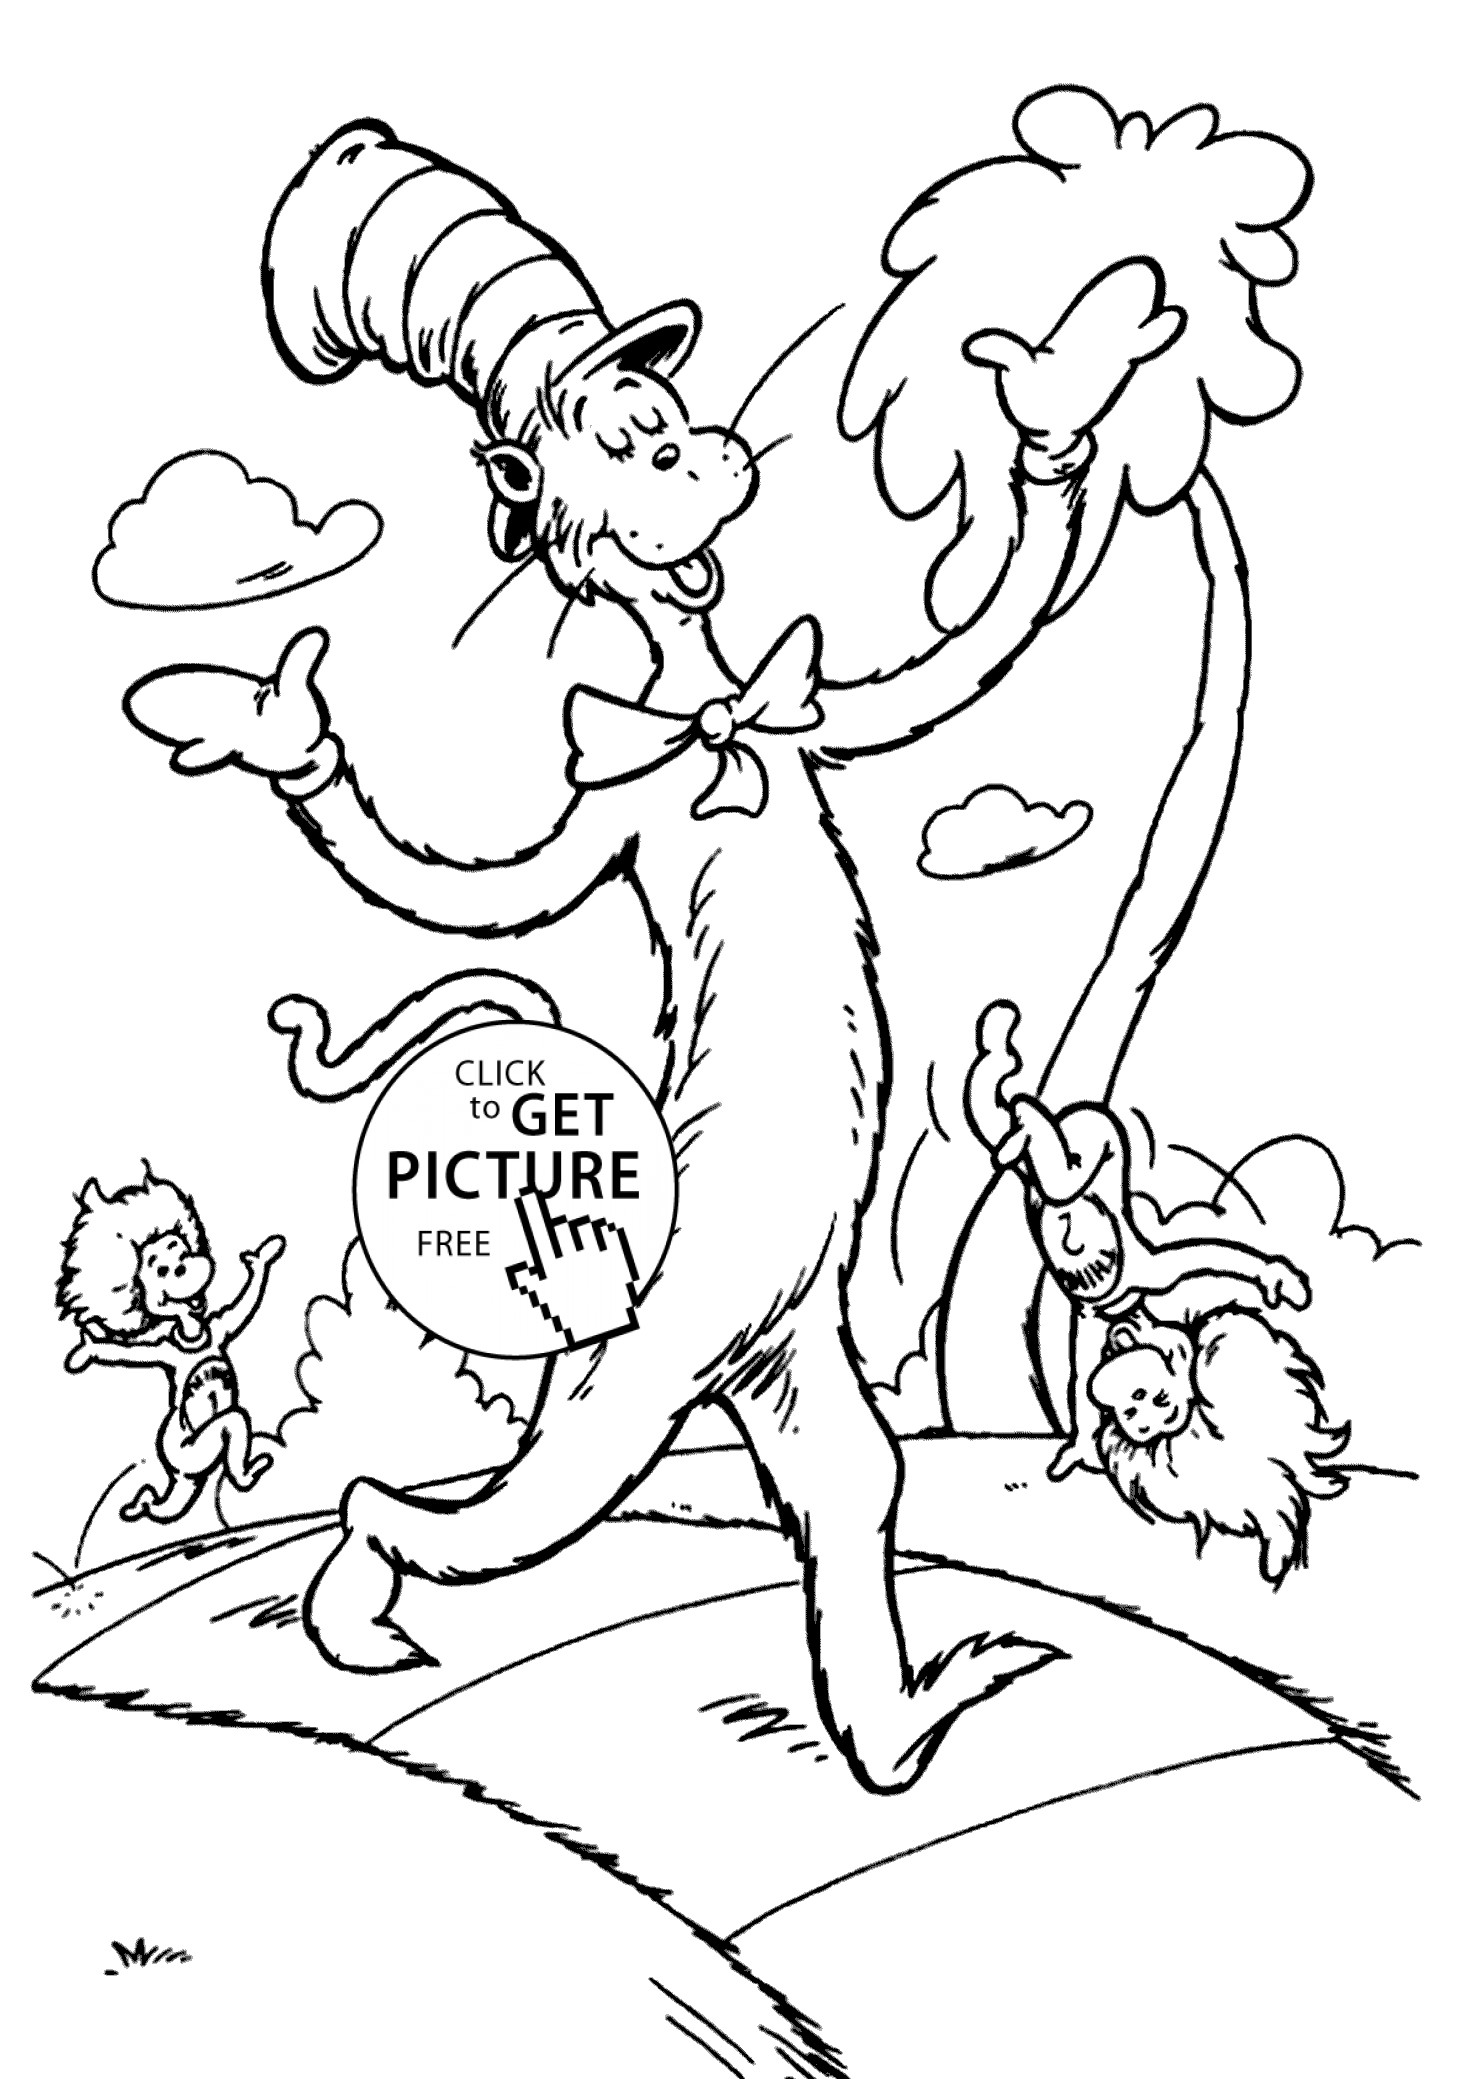 Cat And The Hat Coloring Pages
 The Сat in the hat and promenade coloring pages for kids